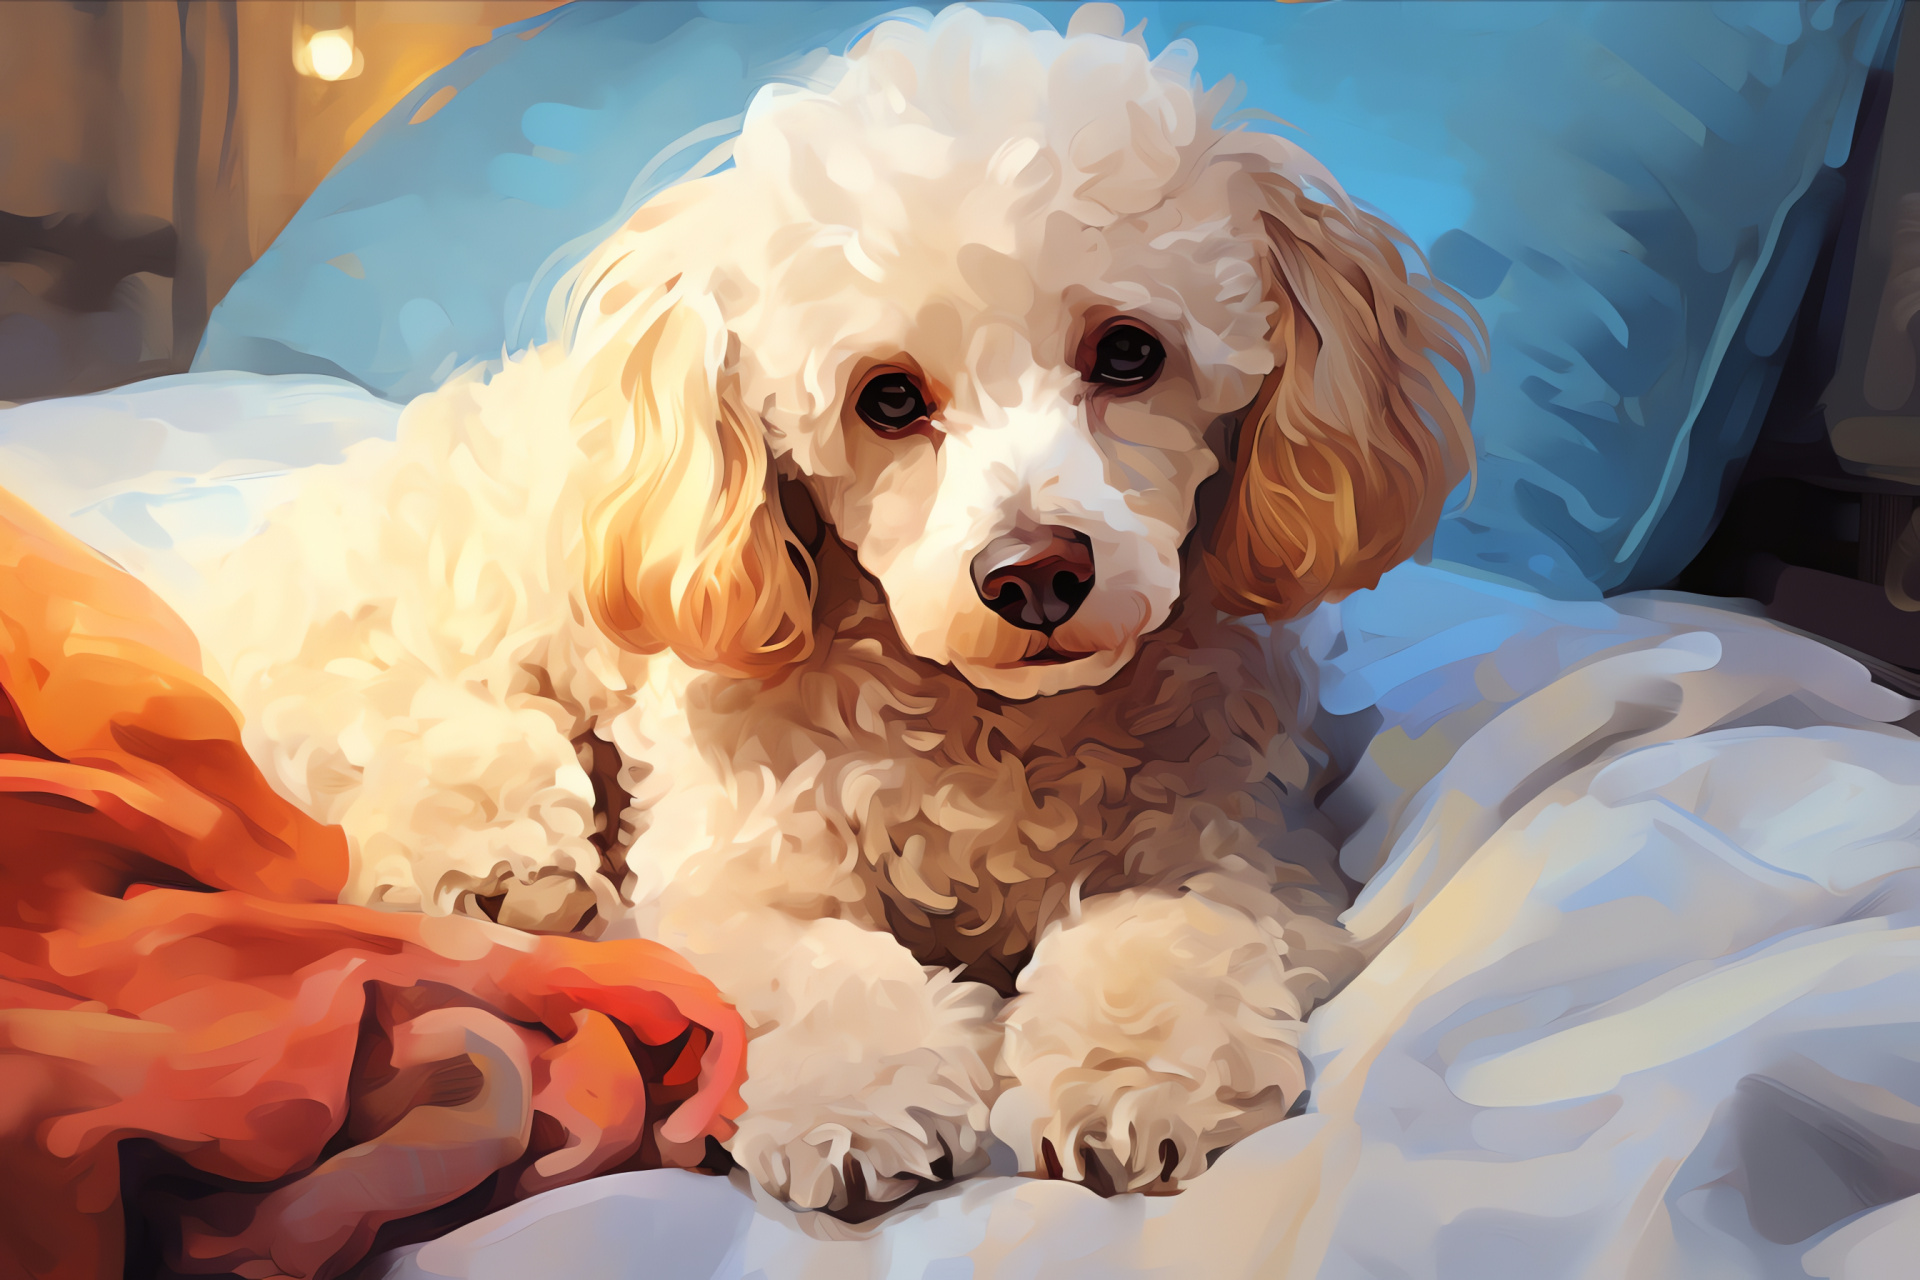 Companion Poodle bedside, cream-toned fur, wise brown eyes, long haired comfort, homely proximity, HD Desktop Image